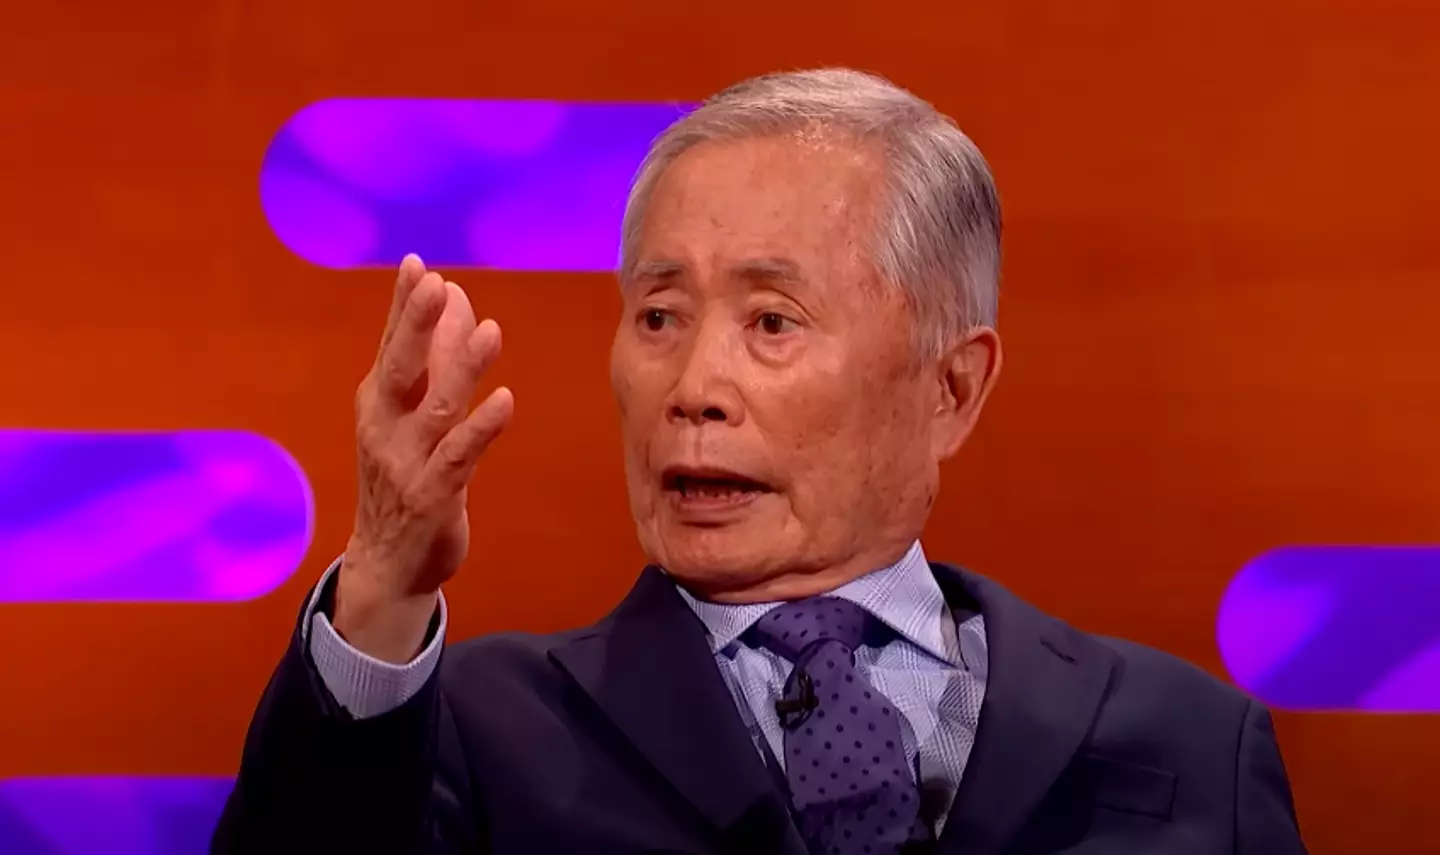 George Takei hits out at Star Trek co-star William Shatner on The Graham Norton Show as their ongoing beef continues.